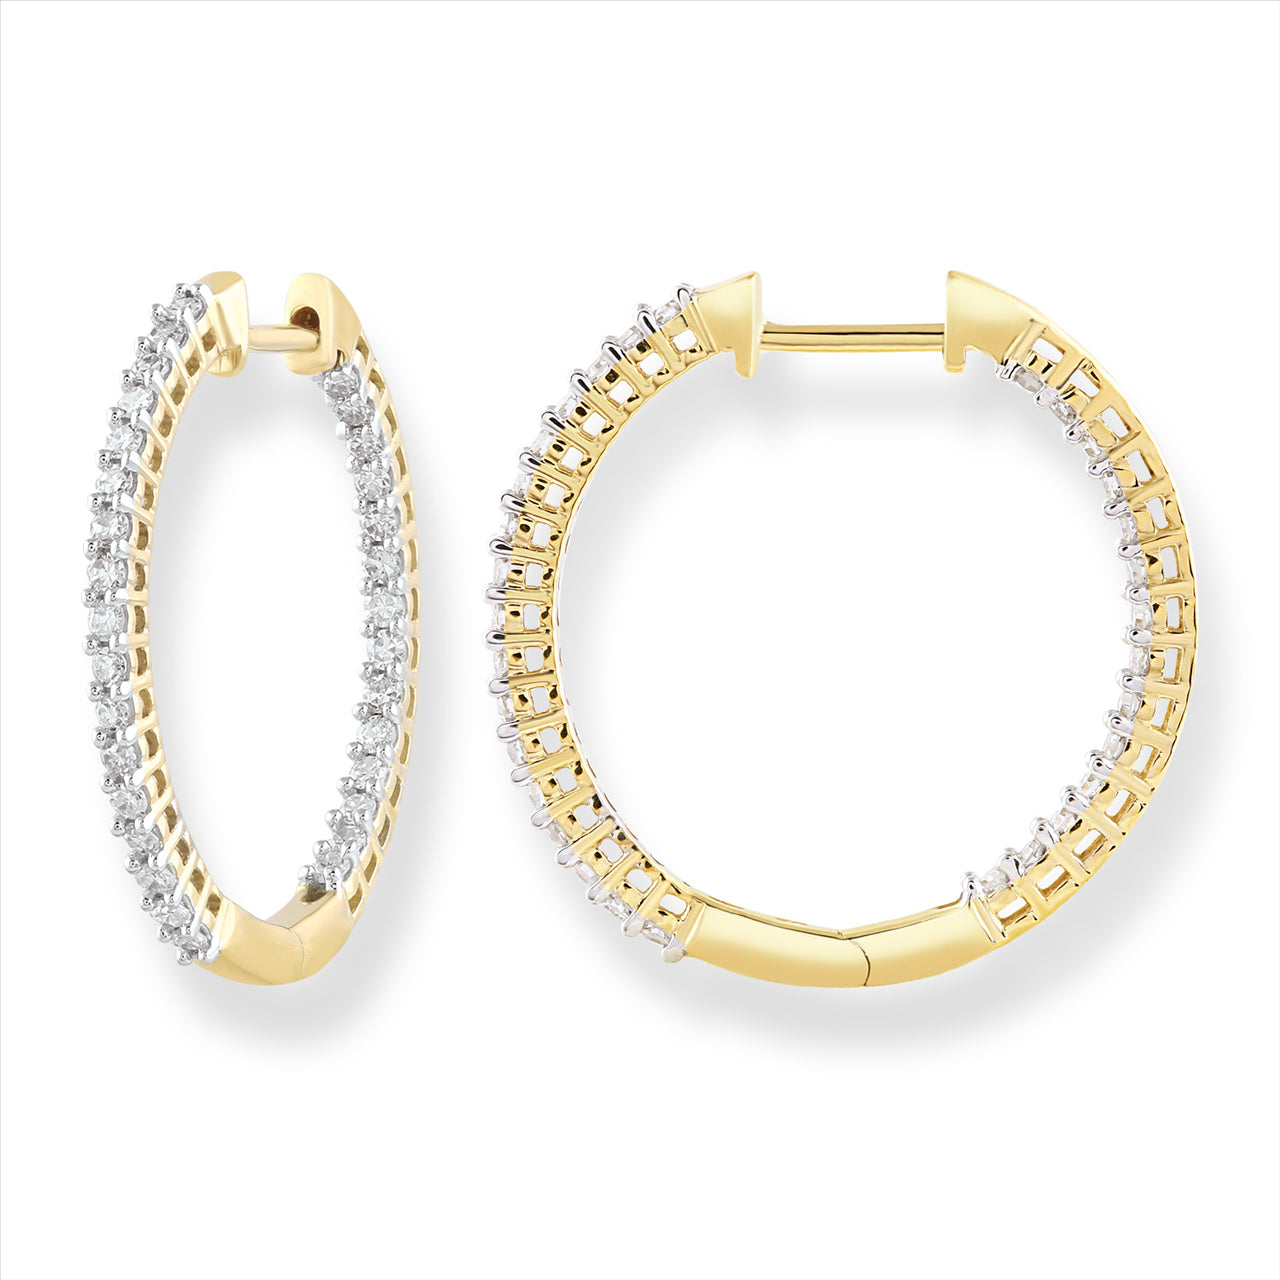 9Ct Yellow Gold Hoops With Diamonds Set In + Out 0.50ct HI I1